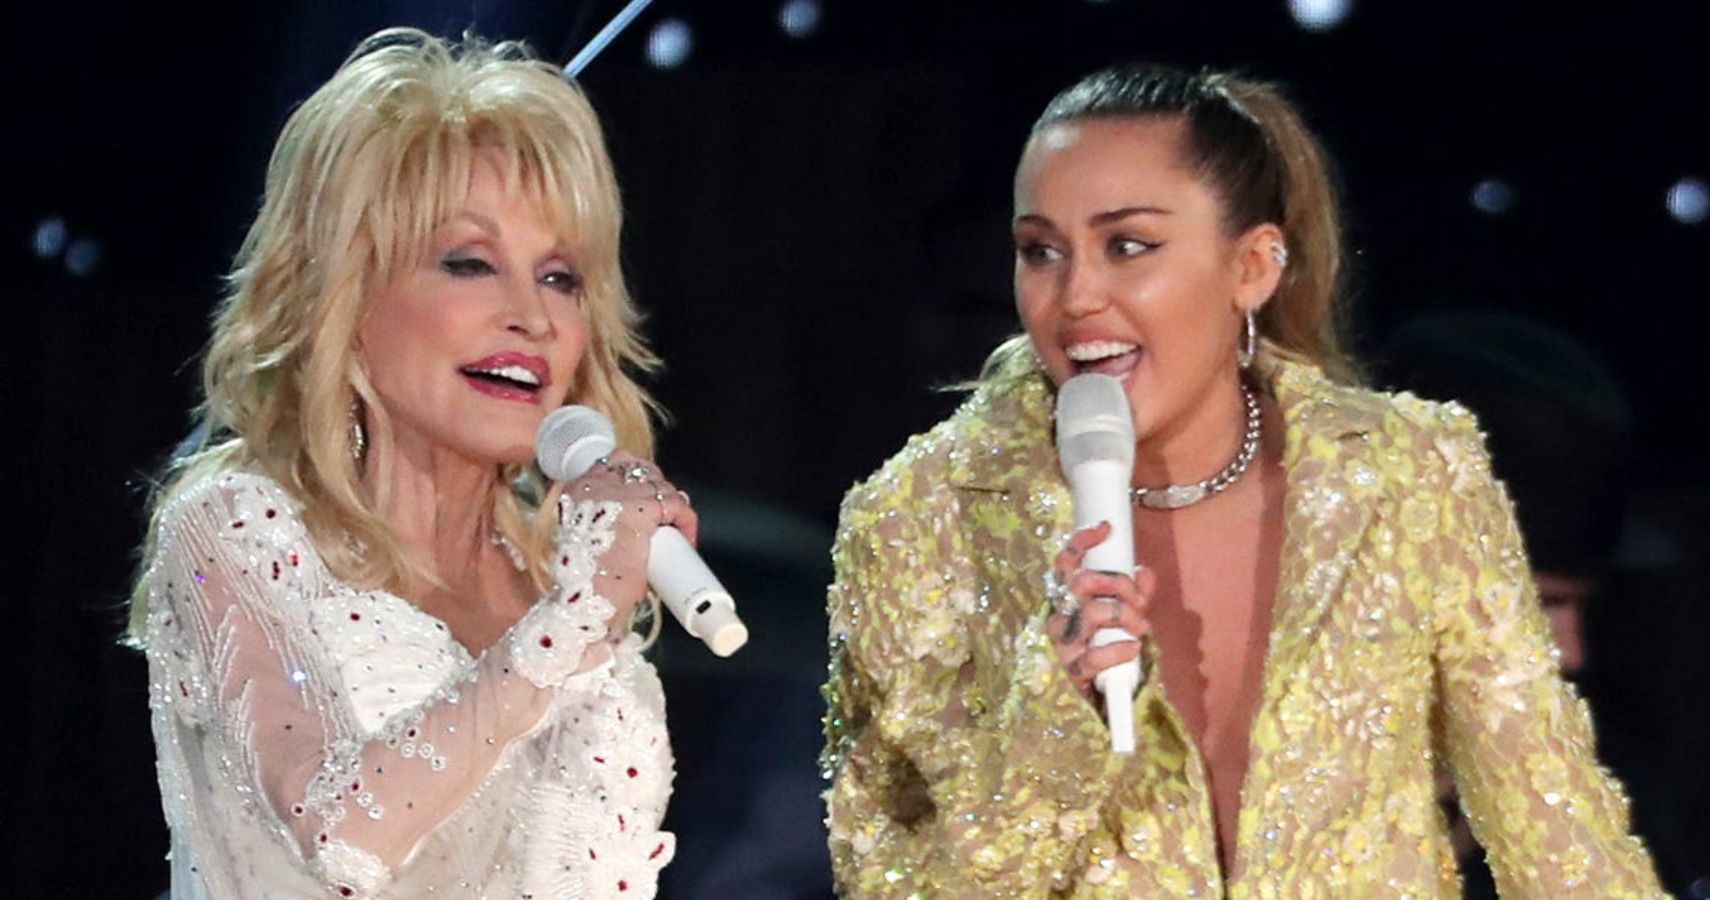 Dolly Parton is releasing first rock album with Miley Cyrus